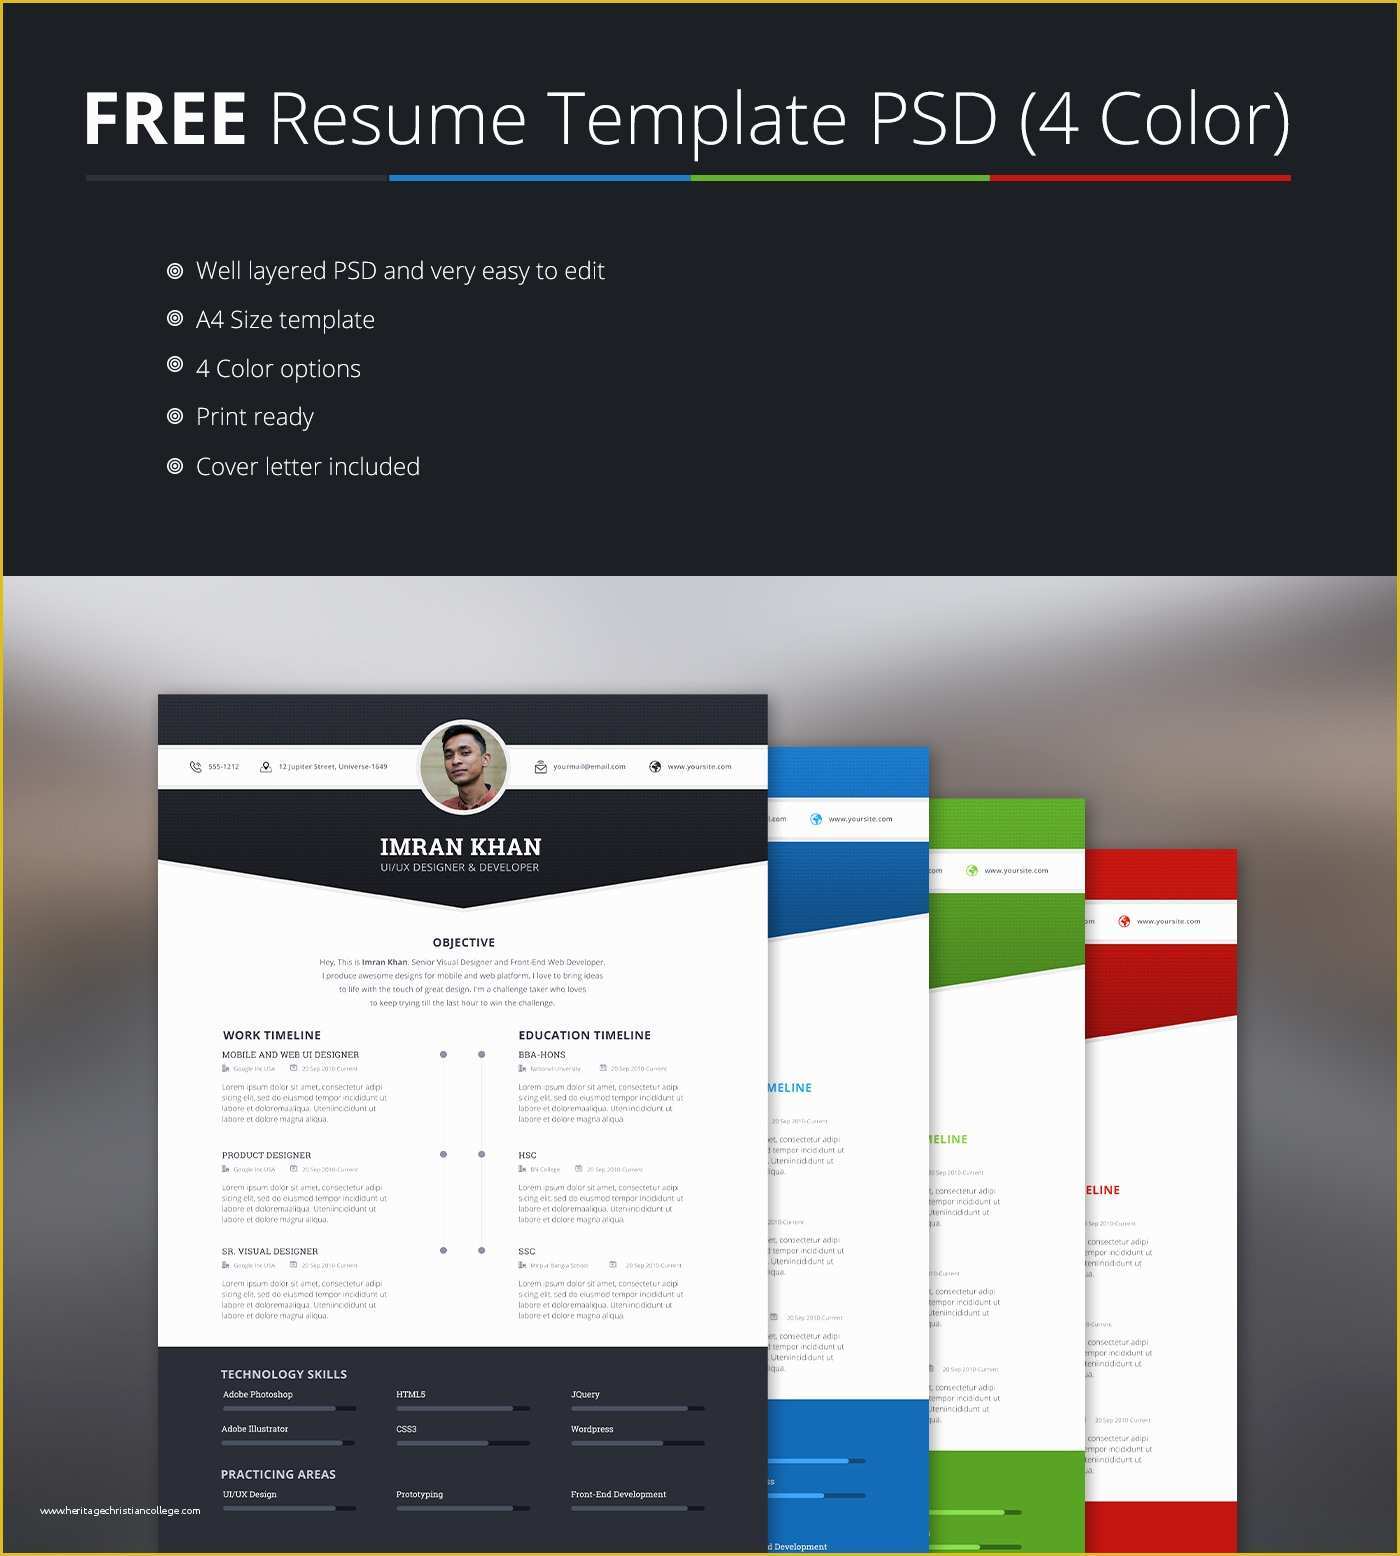 Psd Website Templates Free Download 2017 Of Free Psd Resume Template In Four Colors